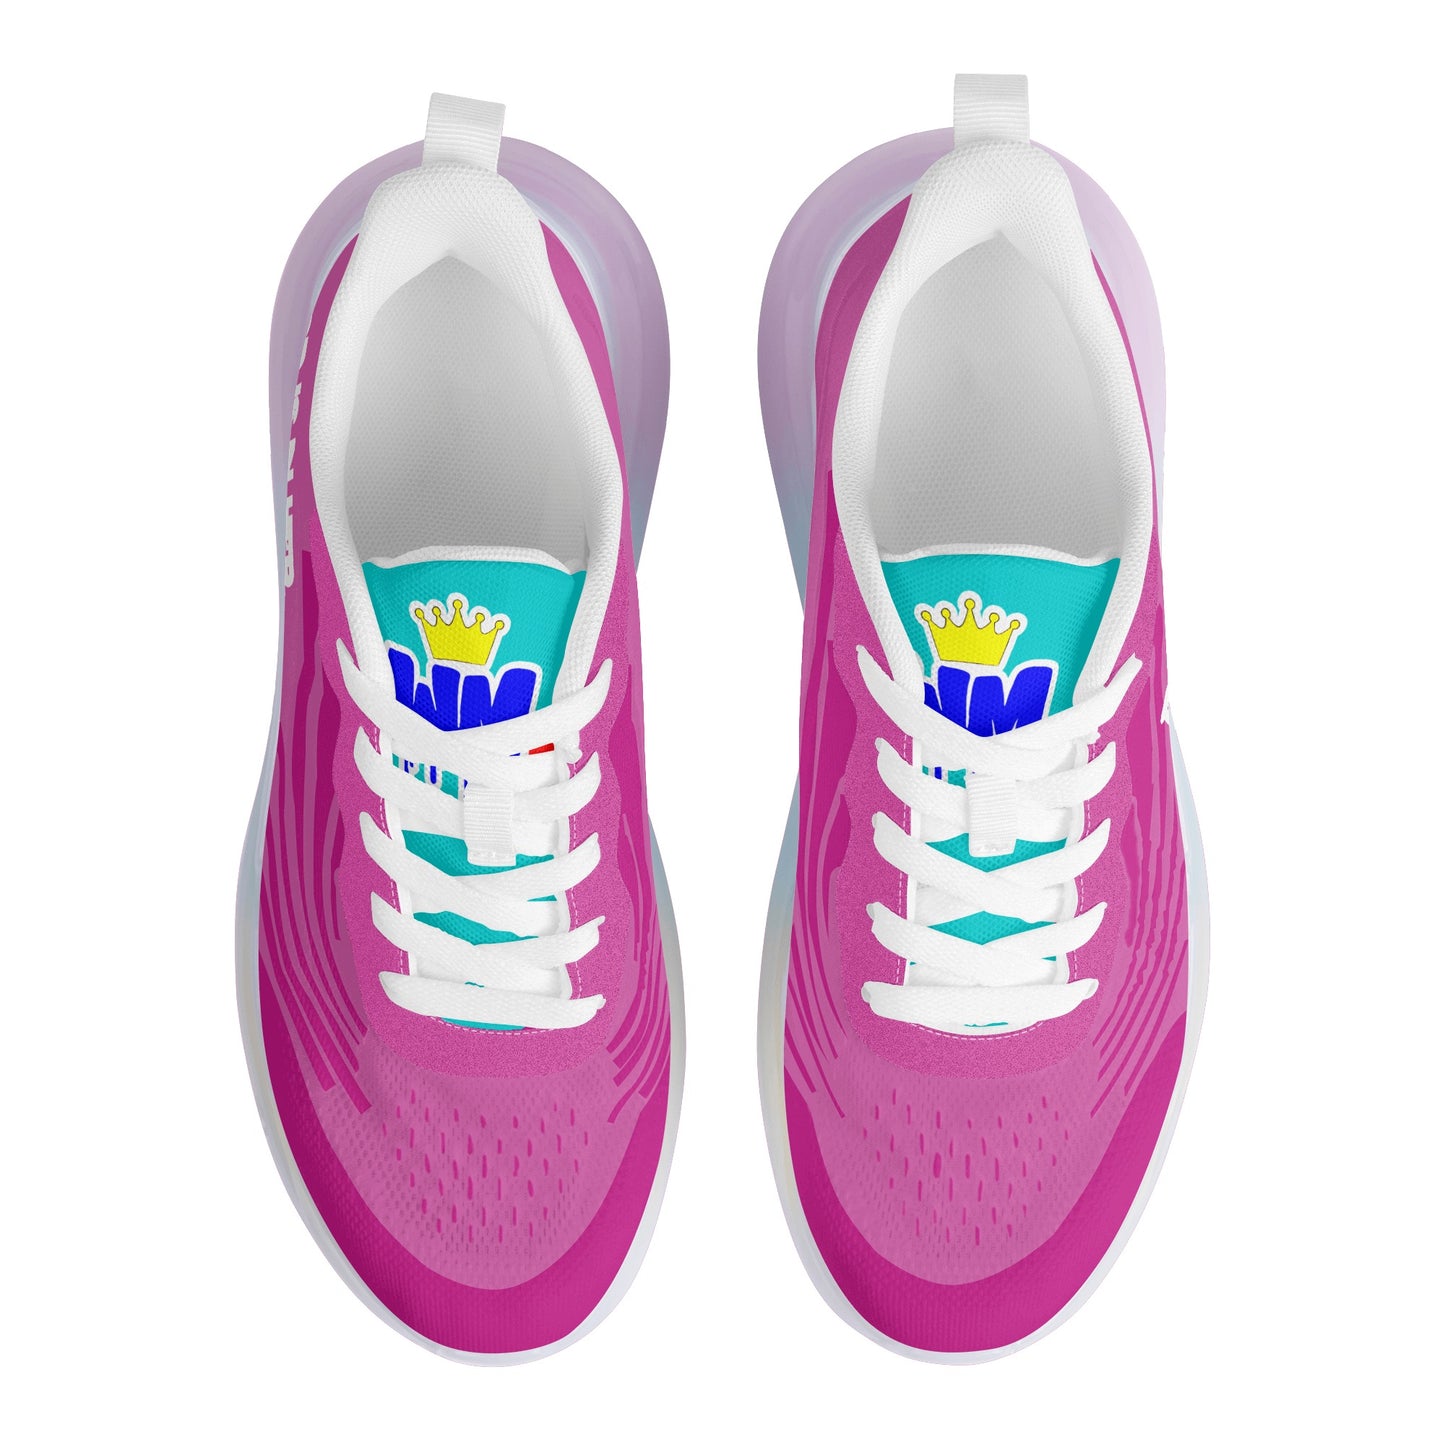 William Michaels Ps465 Womens Athletic Shoe (Hot Pink)